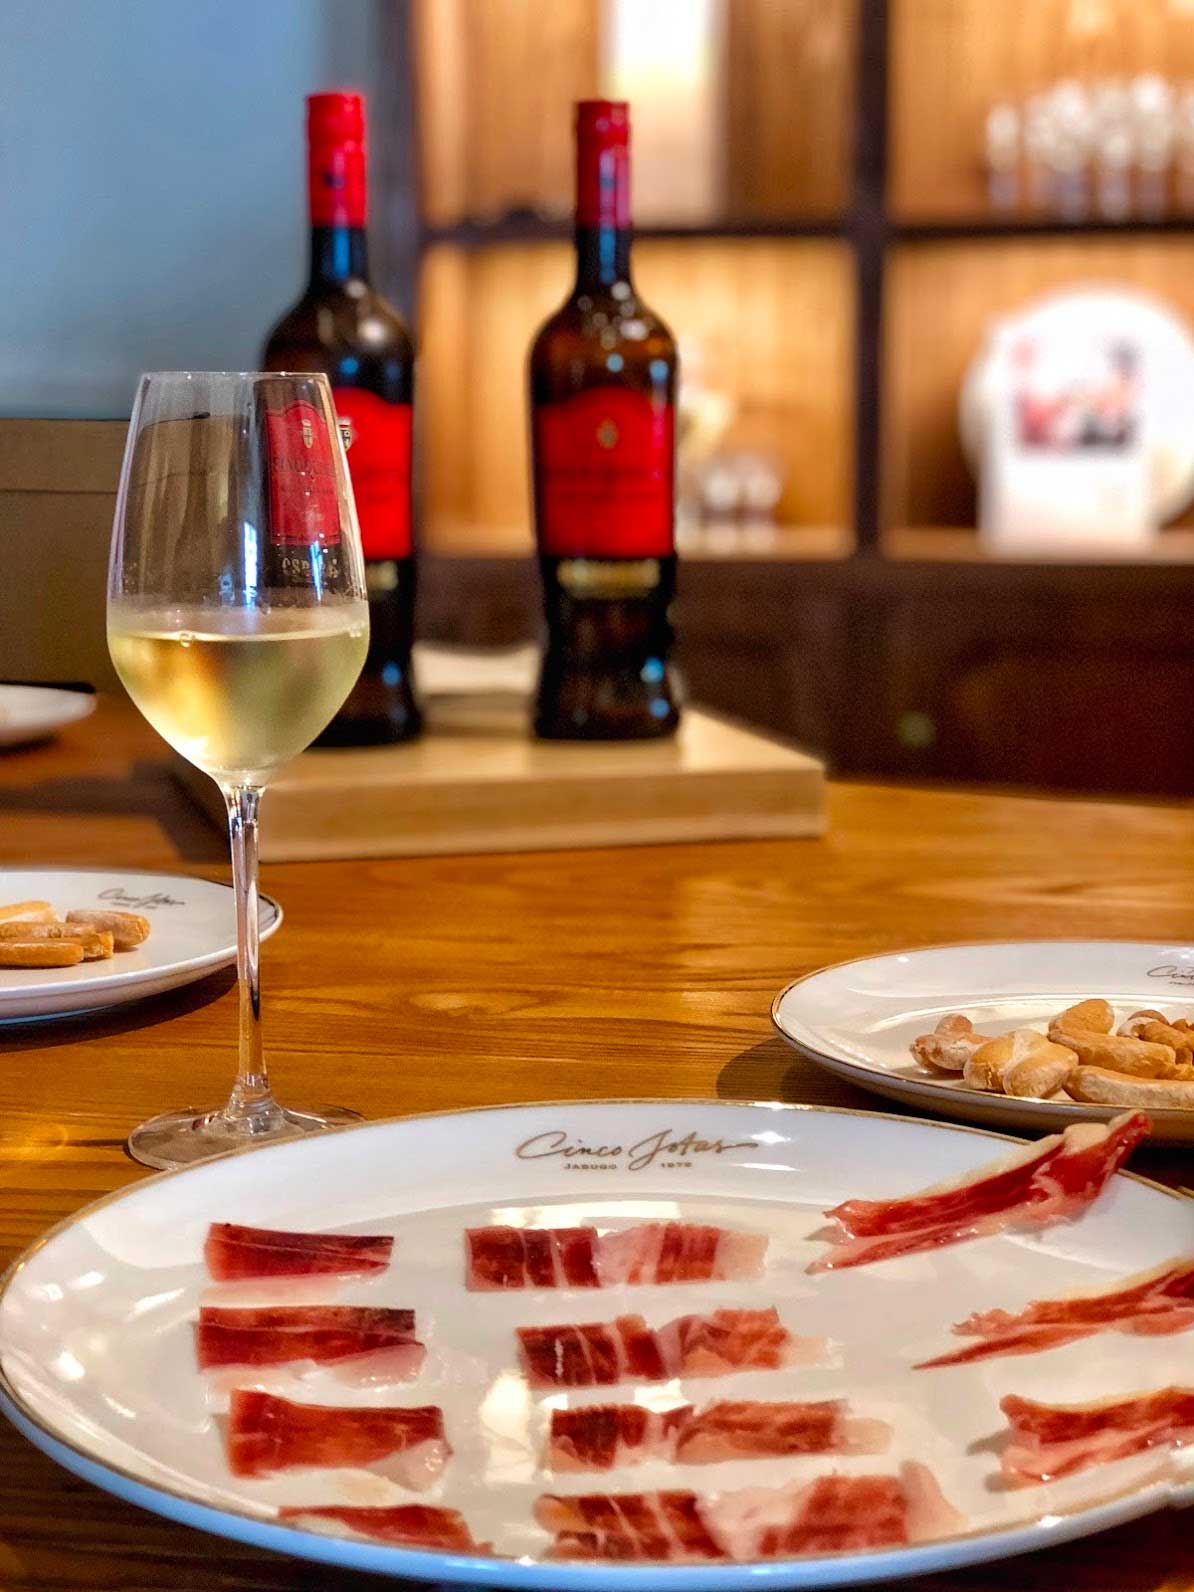 Iberian Ham: one of the most delicious foods in the world!